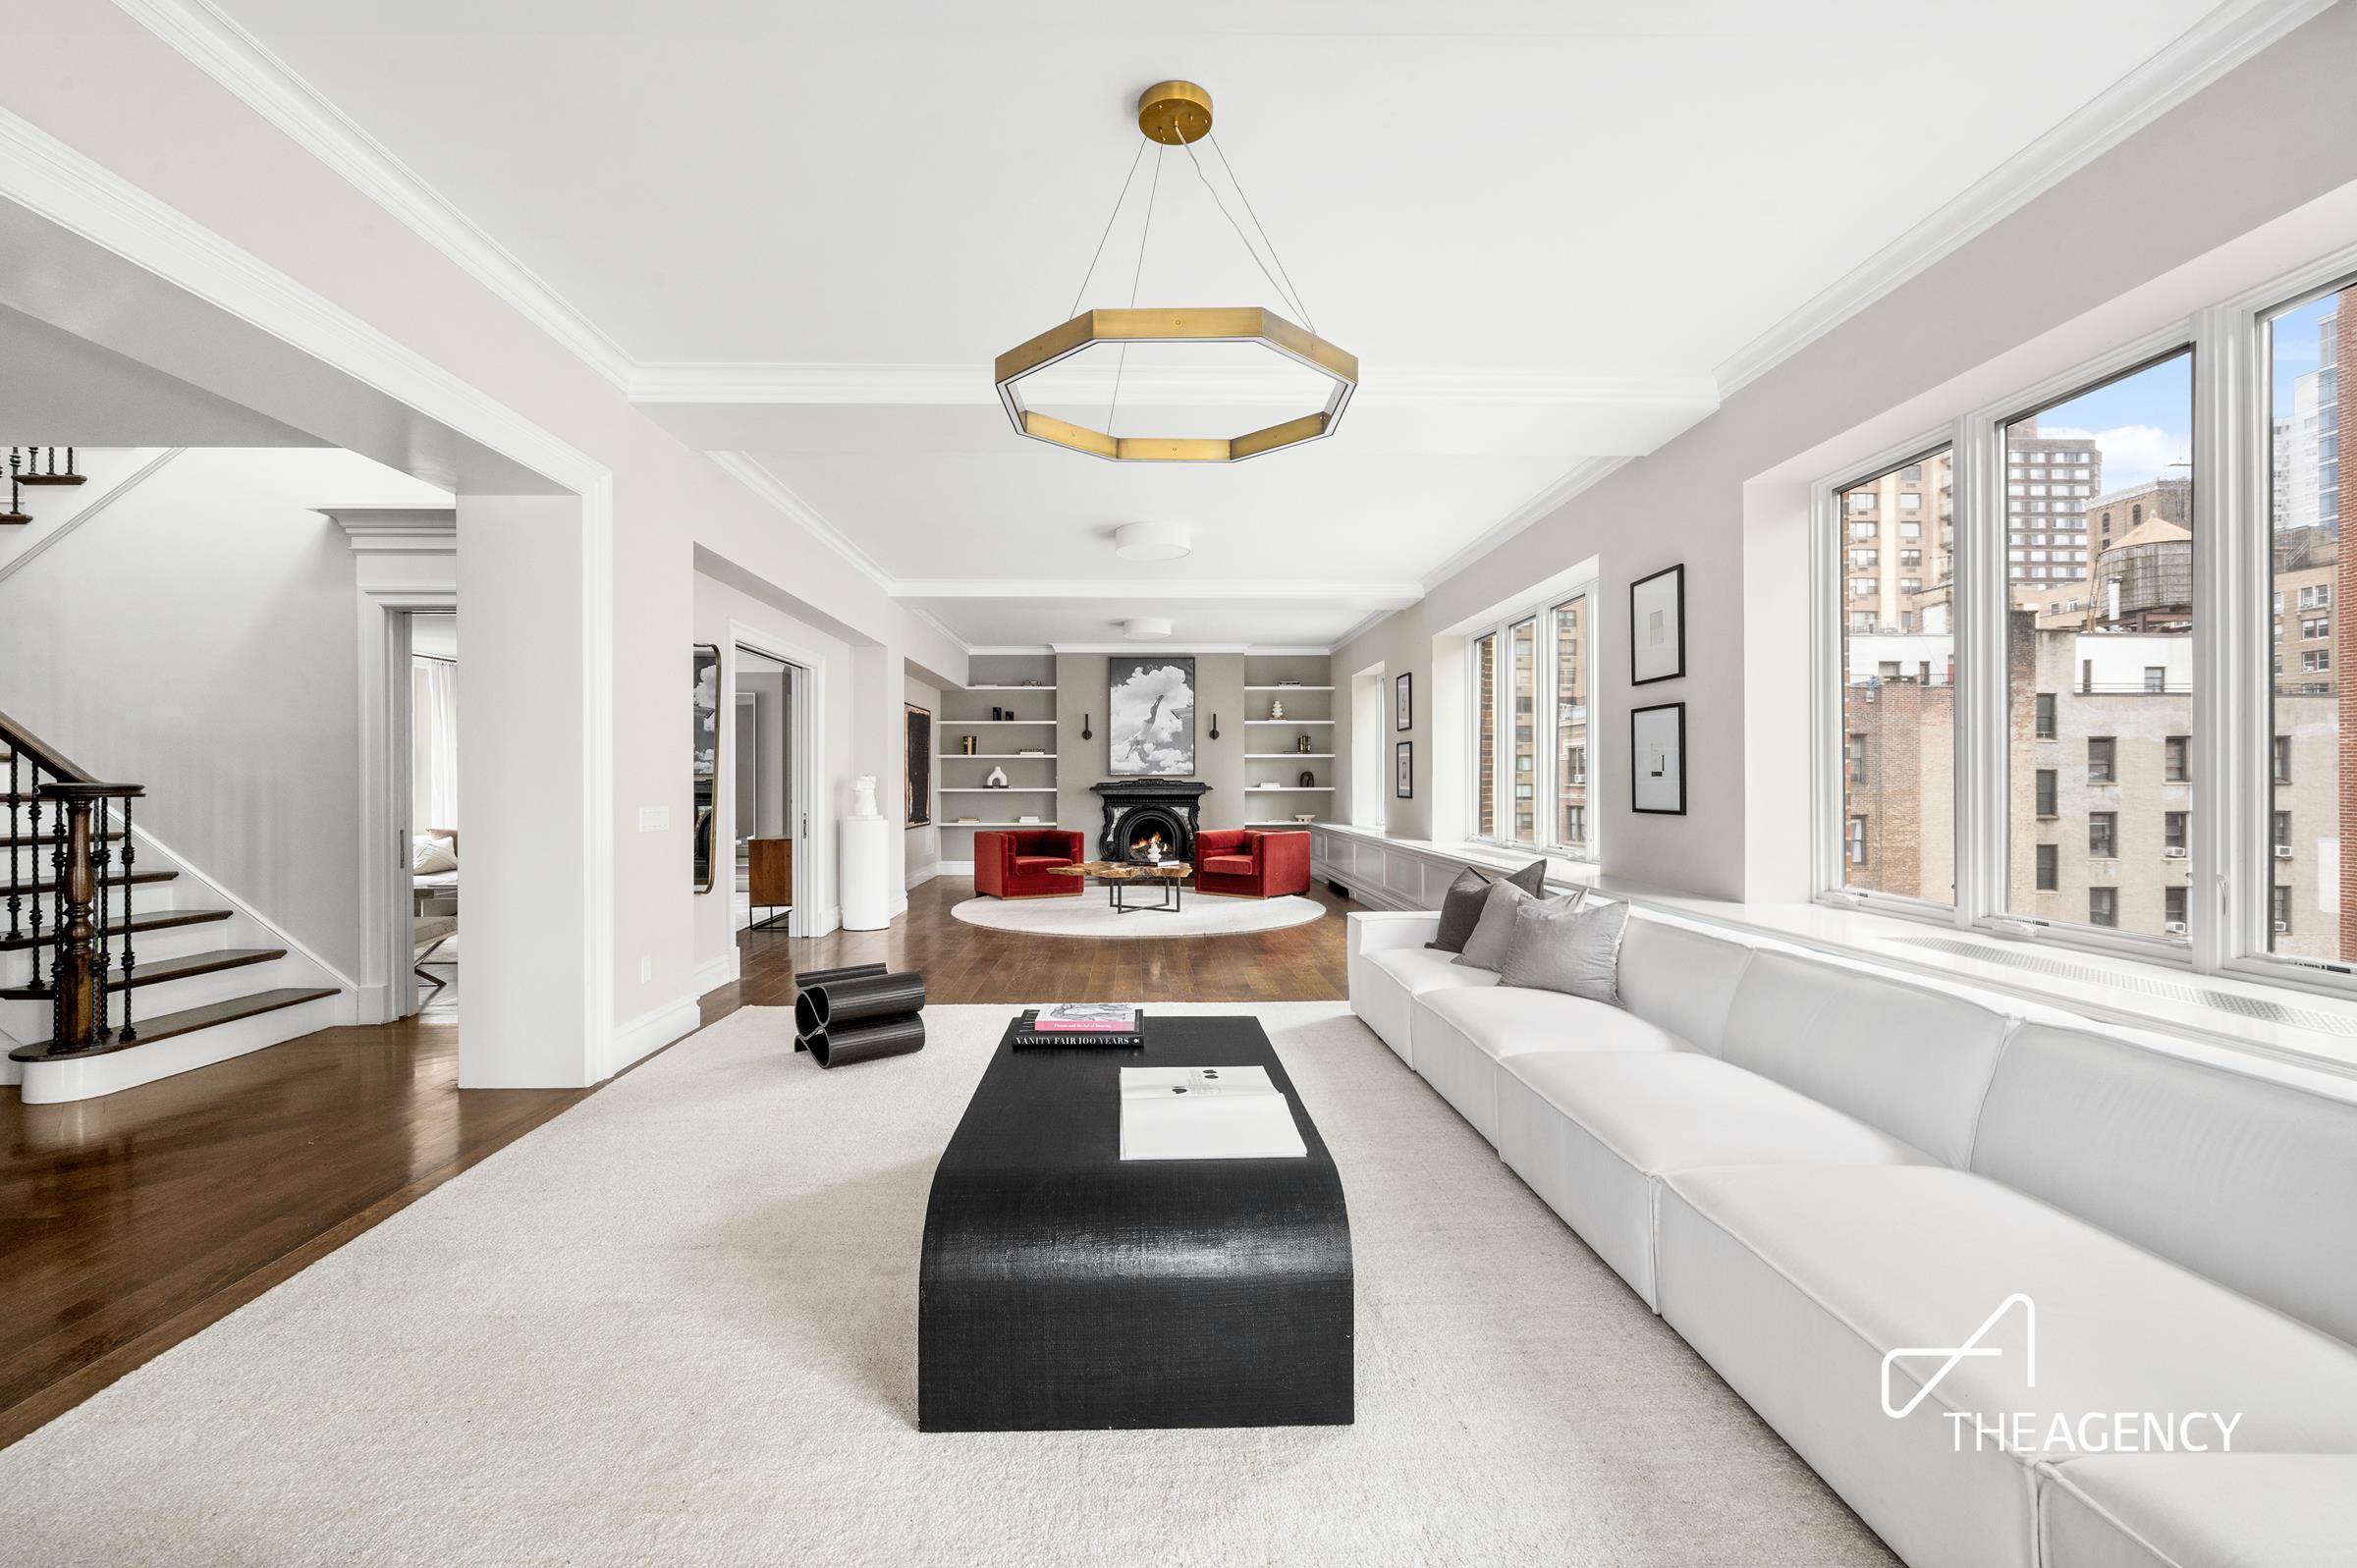 235 West 71st Street Ph, Lincoln Square, Upper West Side, NYC - 5 Bedrooms  
4.5 Bathrooms  
8 Rooms - 